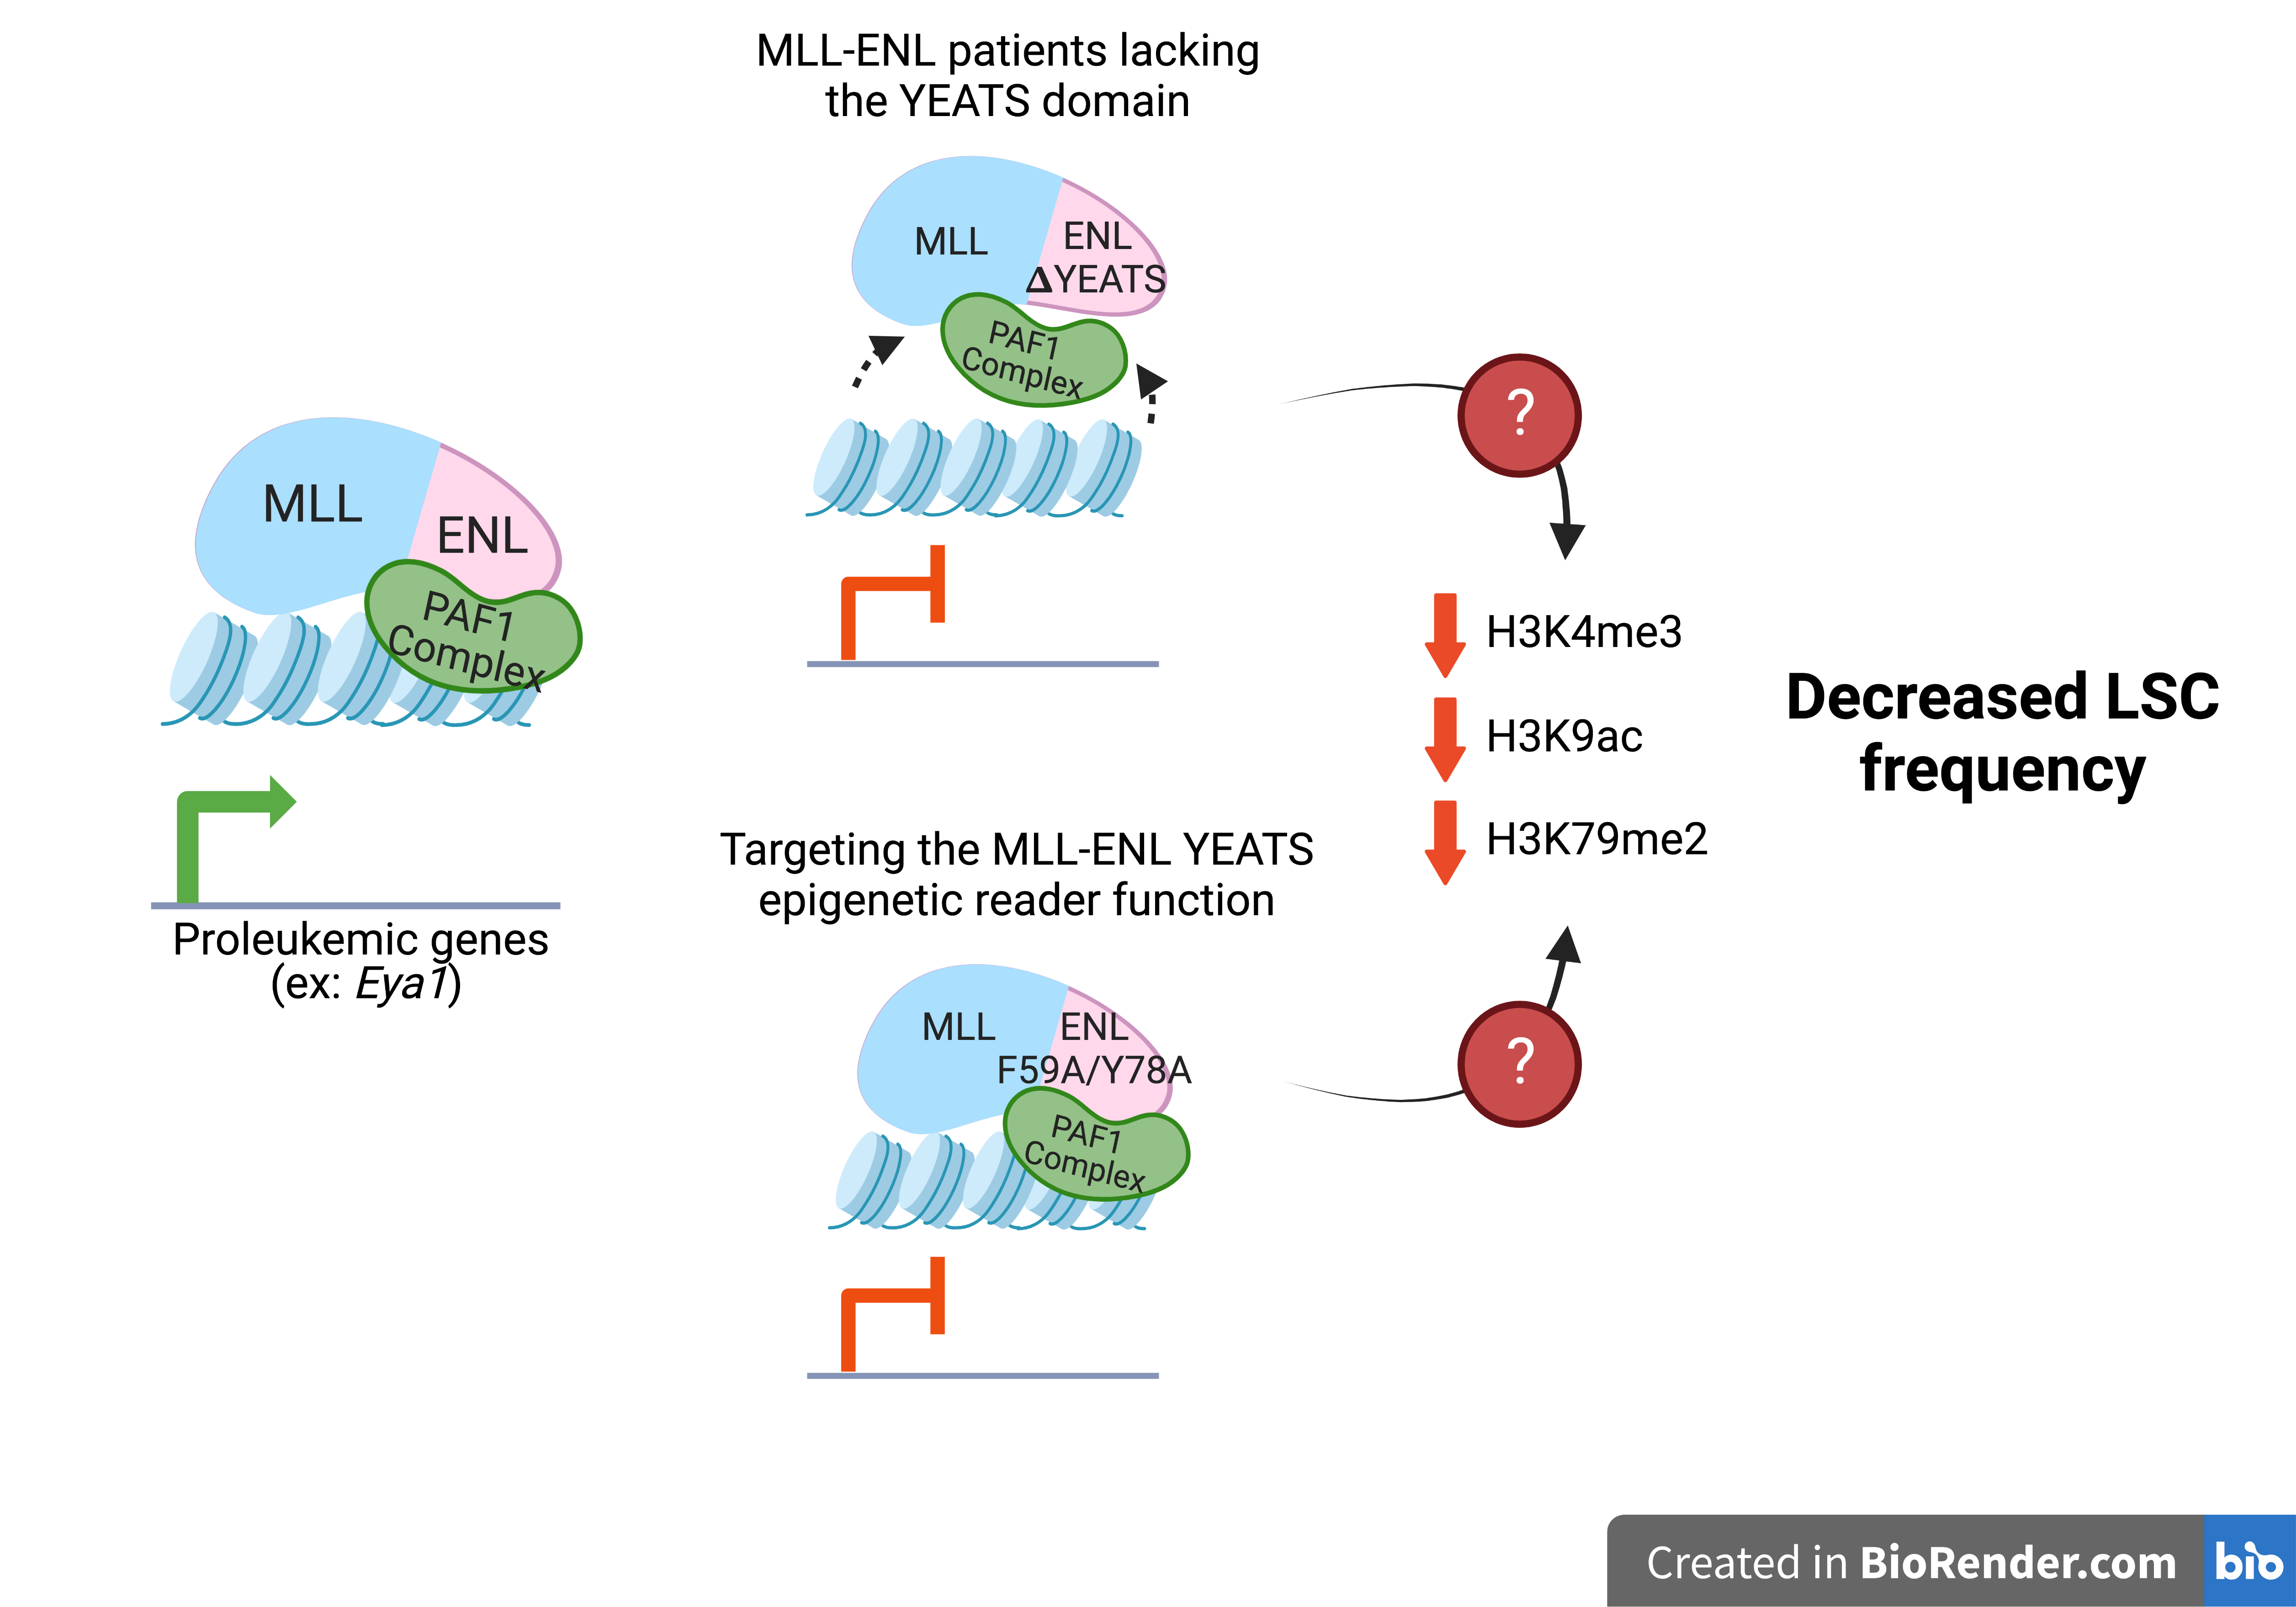 The schematic of current working model on how the YEATS domain contribute to MLL-ENL leukemogenesis. The absence or abrogation of the YEATS epigenetic reader function of the fusion severely perturbs the epigenetic landscape and expression of a subset of MLL-ENL targets, leading to change in leukemic stem cell frequency. 